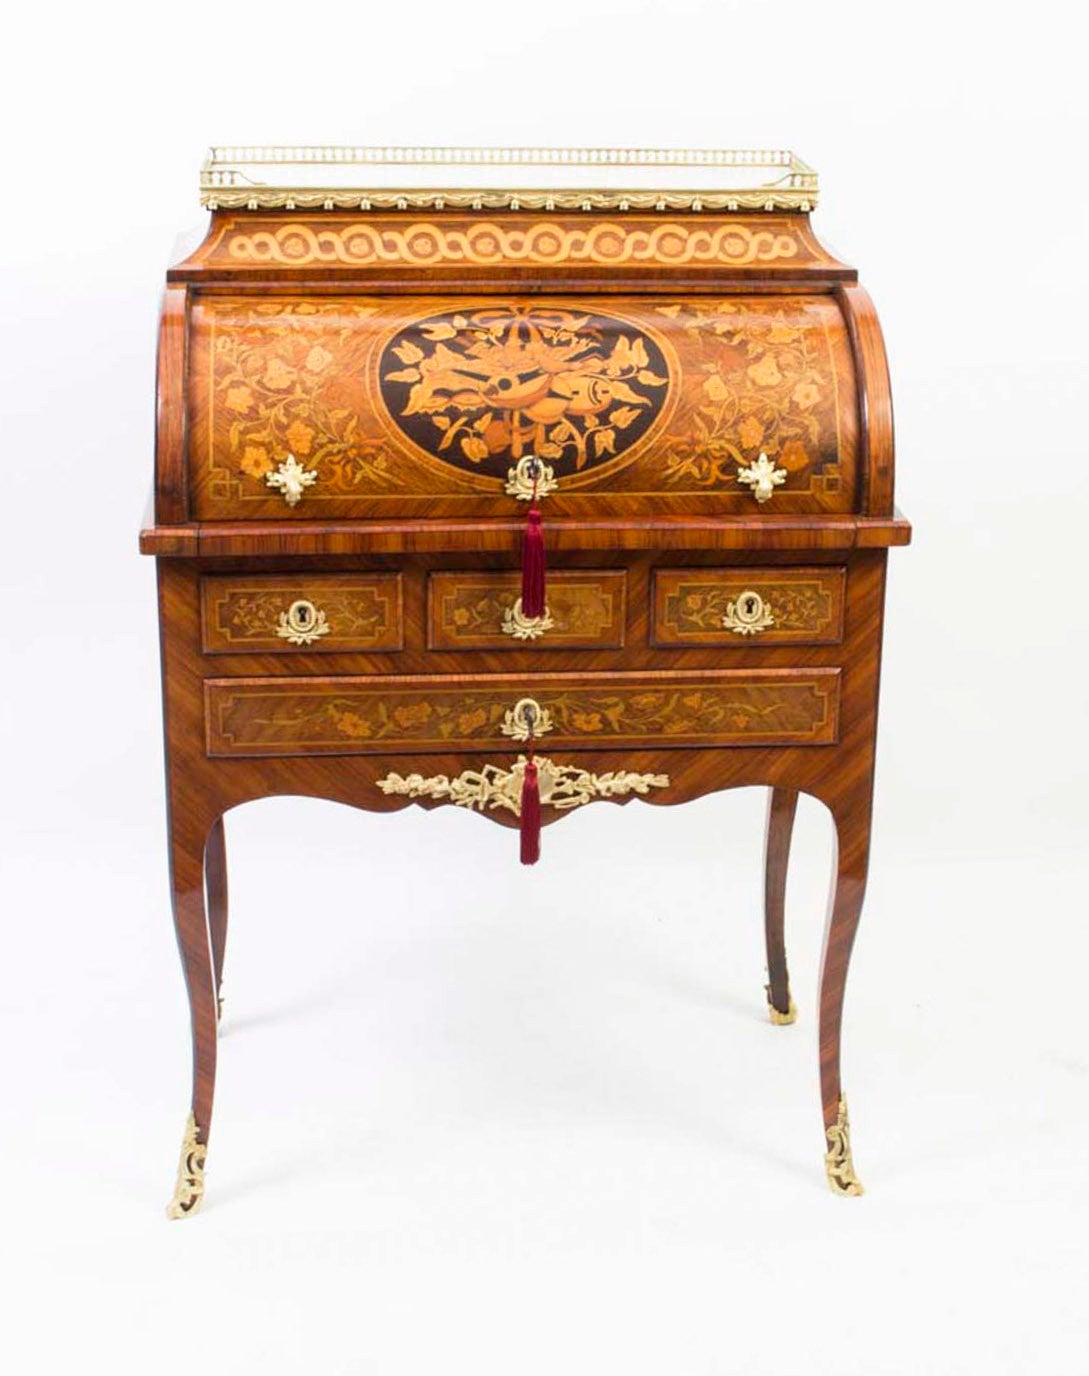 This is a gorgeous antique French kingwood and marquetry Louis XV Revival secretaire a cylindre, circa 1870 in date. 

It is decorated throughout with beautiful floral marquetry and has a stunning marquetry panel of musical instruments, finished